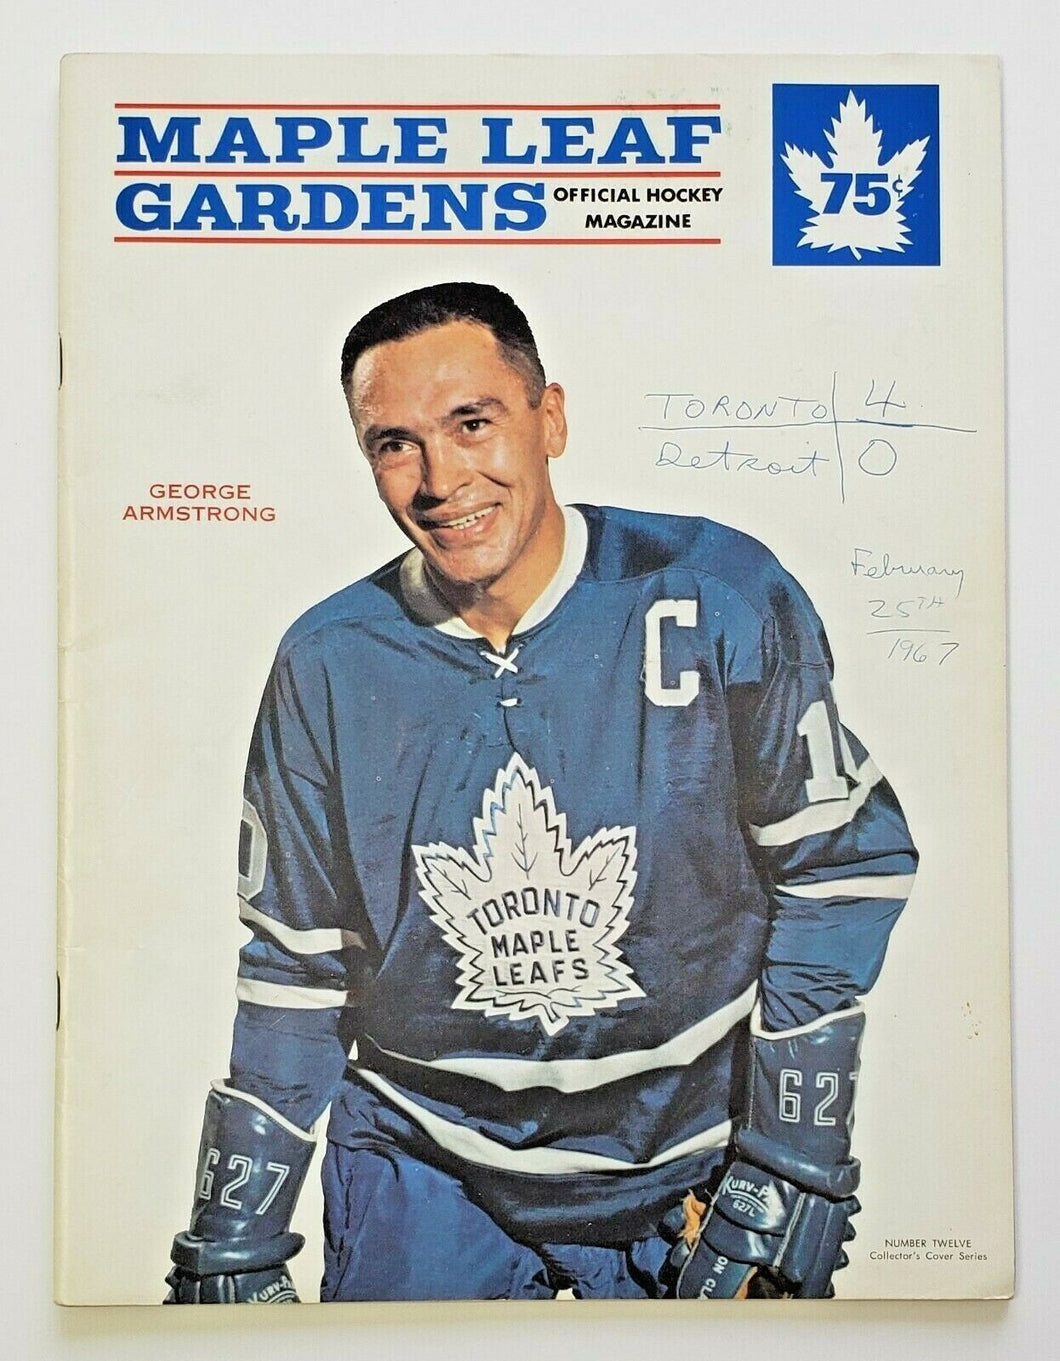 1967 Maple Leaf Gardens Terry Sawchuk 99th Shutout Game Program Armstrong Howe